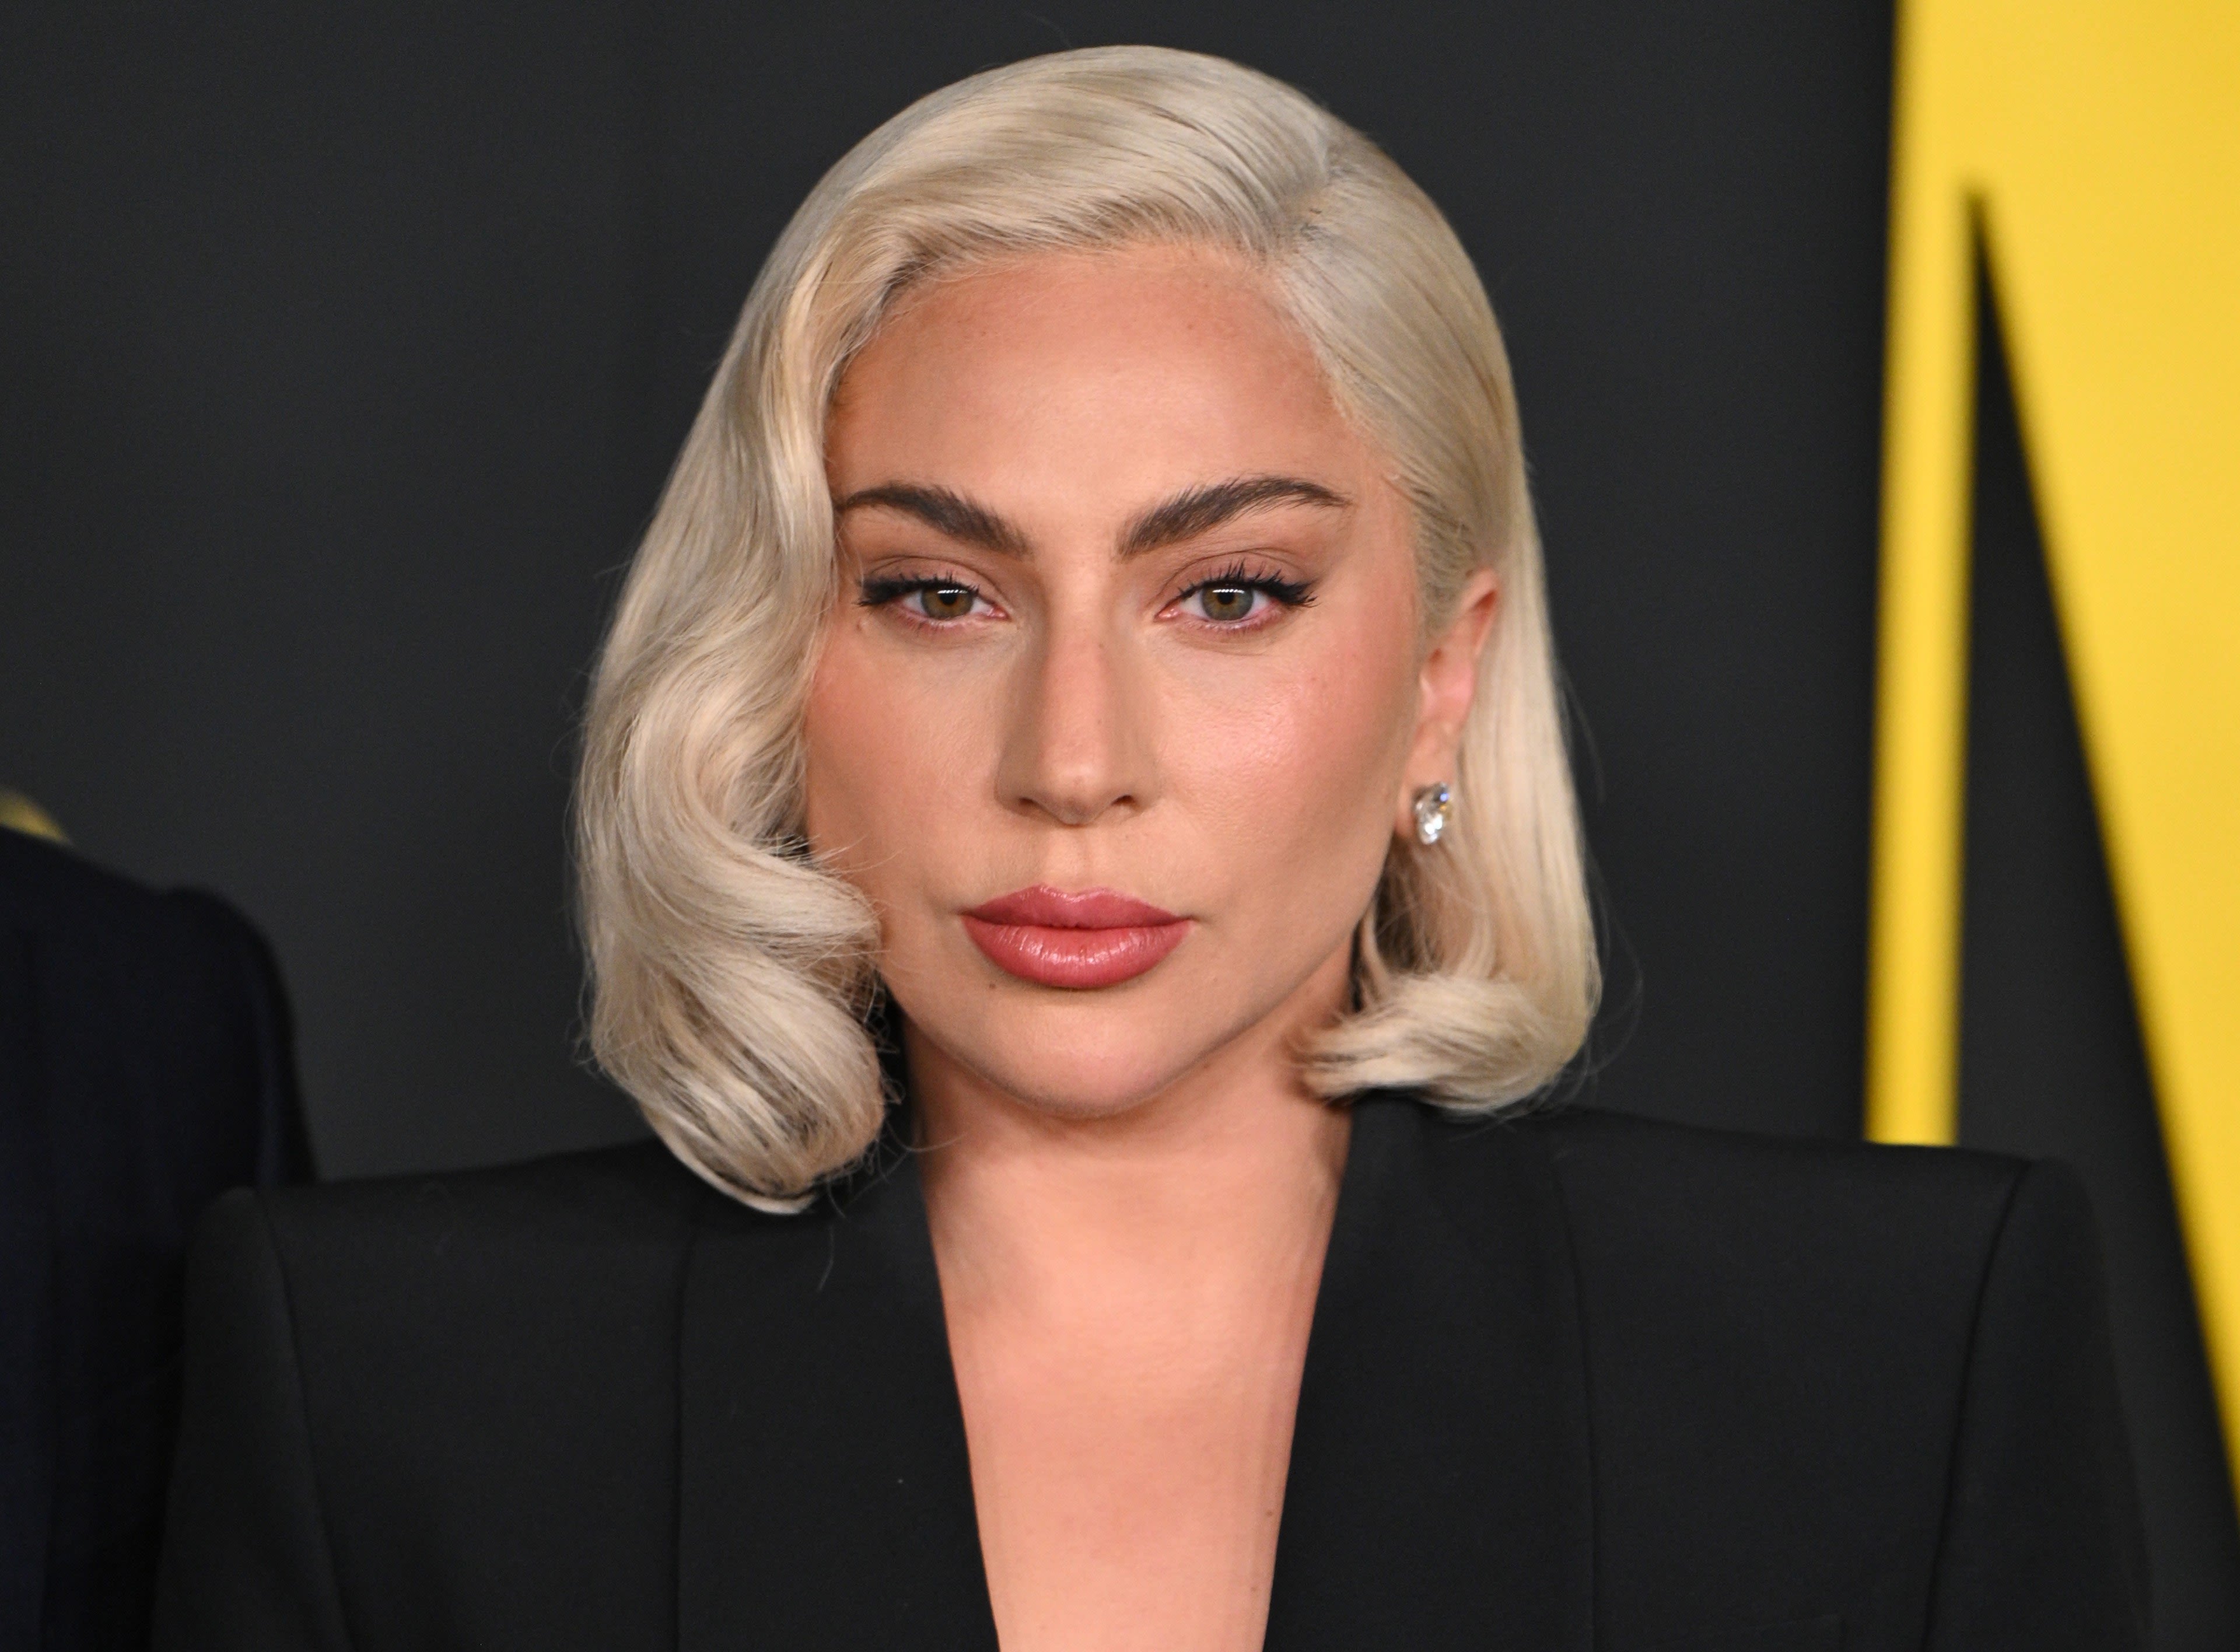 Lady Gaga's Jet-Black Baby Bangs Are a Time Machine Back to 2012